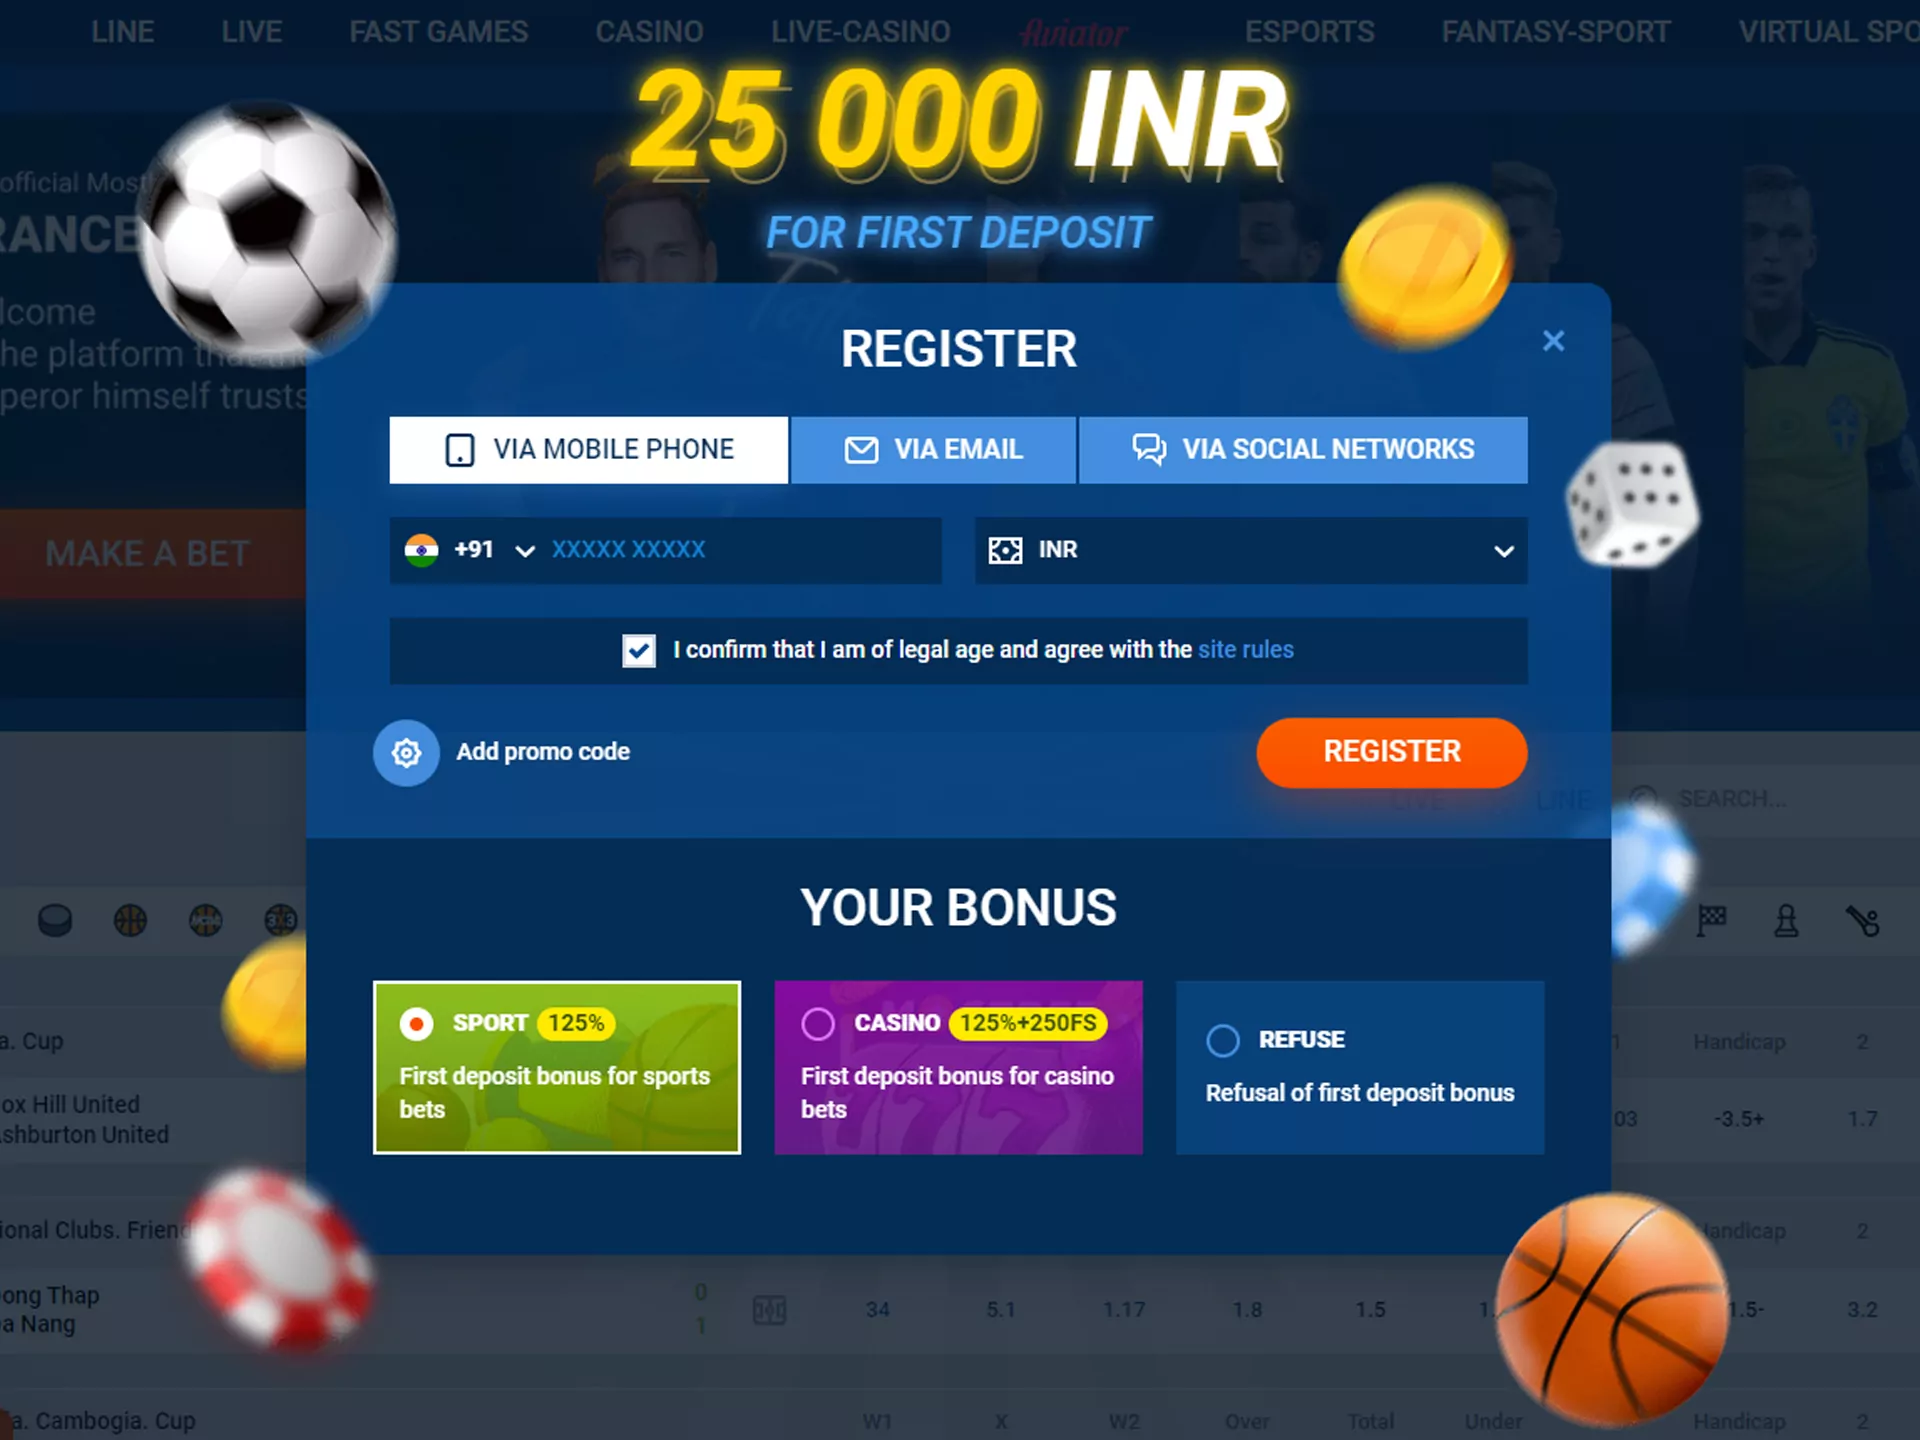 Create account at Mostbet for first deposit.